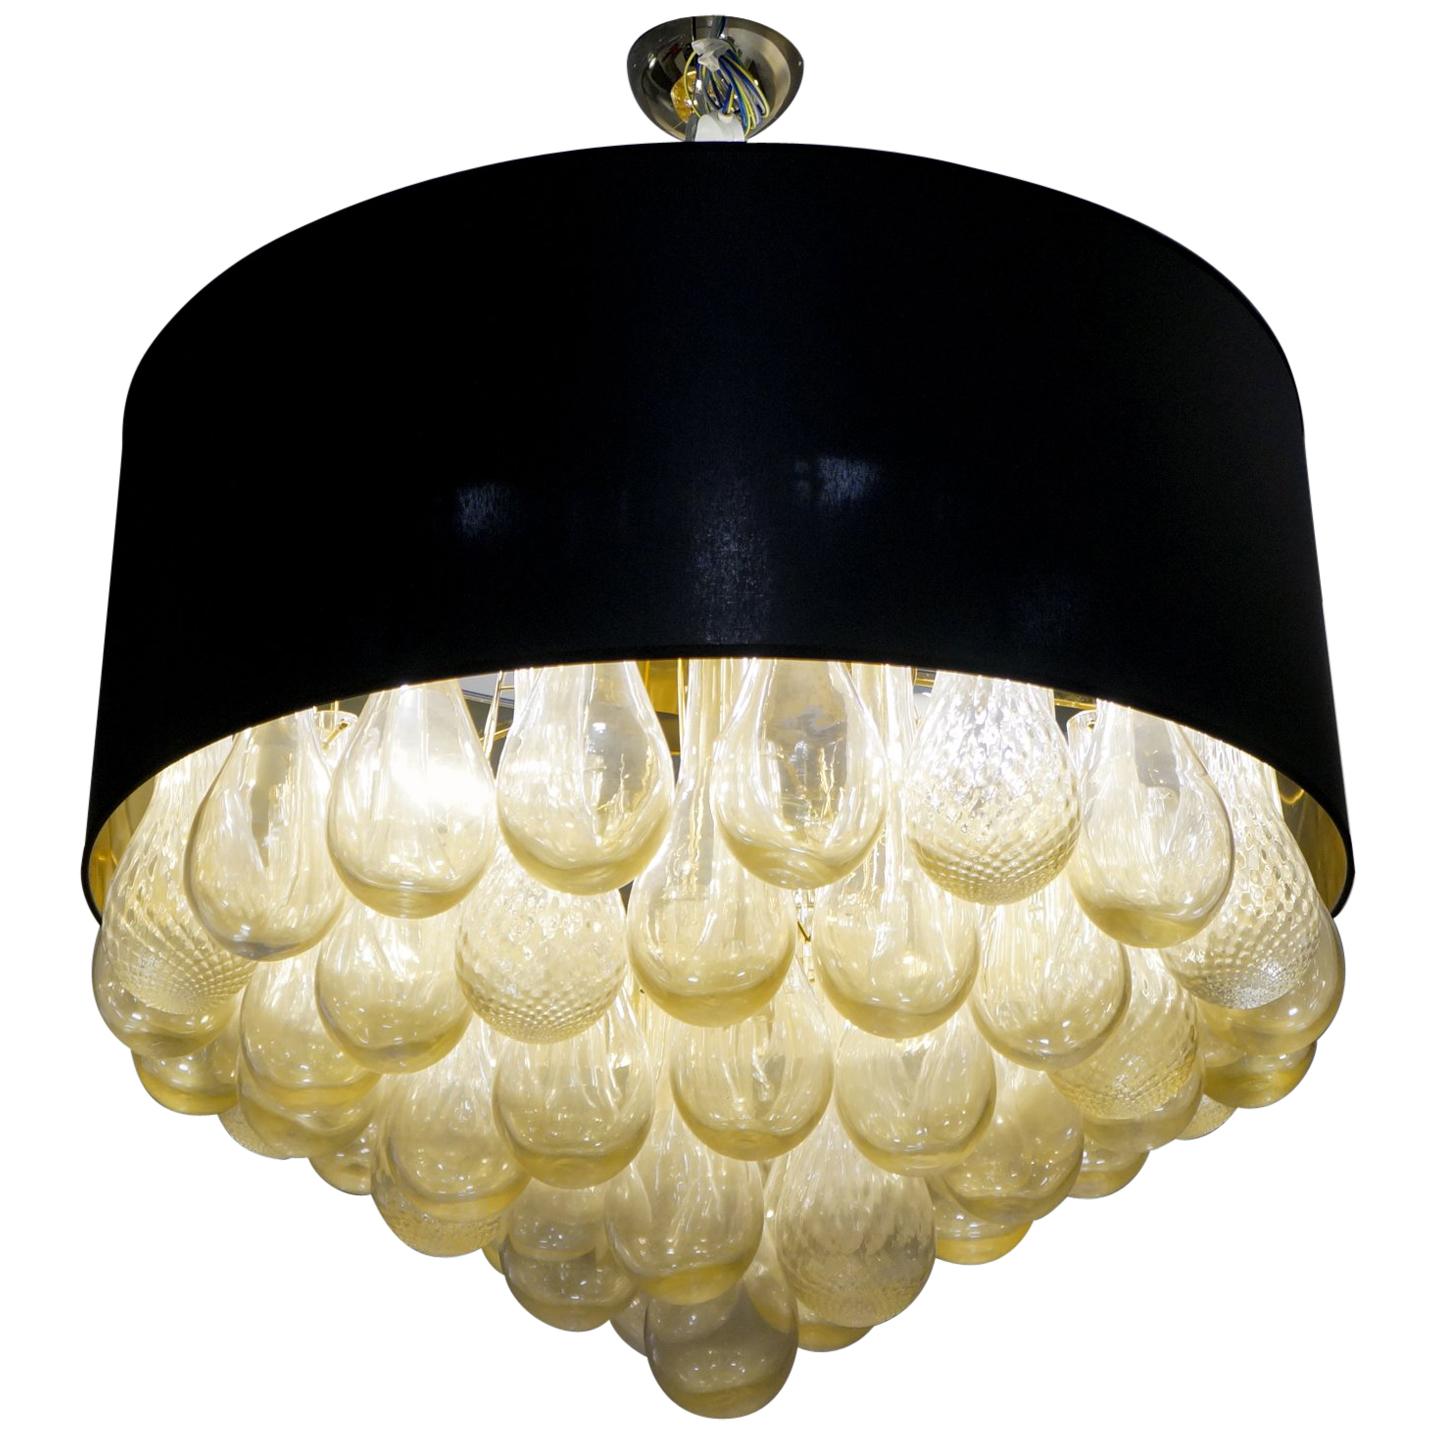 Alberto Donà Mid-Century Modern Gold Leaf Murano Glass Chandelier Gocce, 1990s For Sale